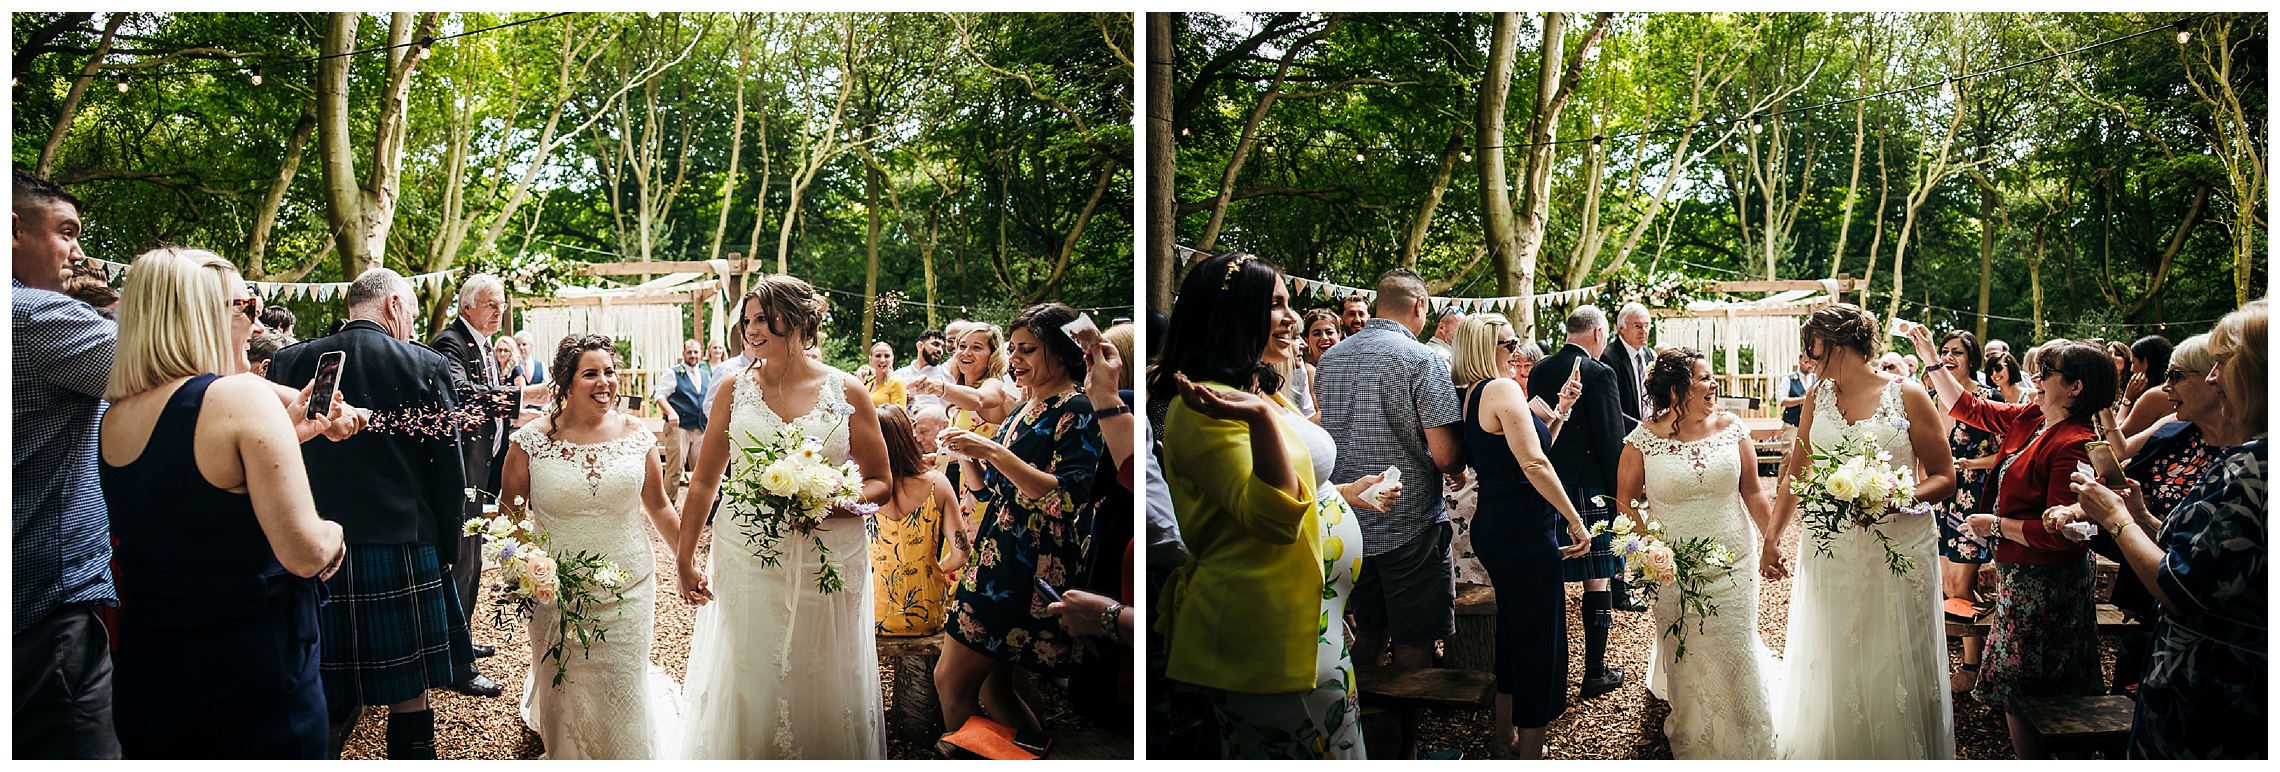 wedding guests cheer for exit of brides at woodland weddings